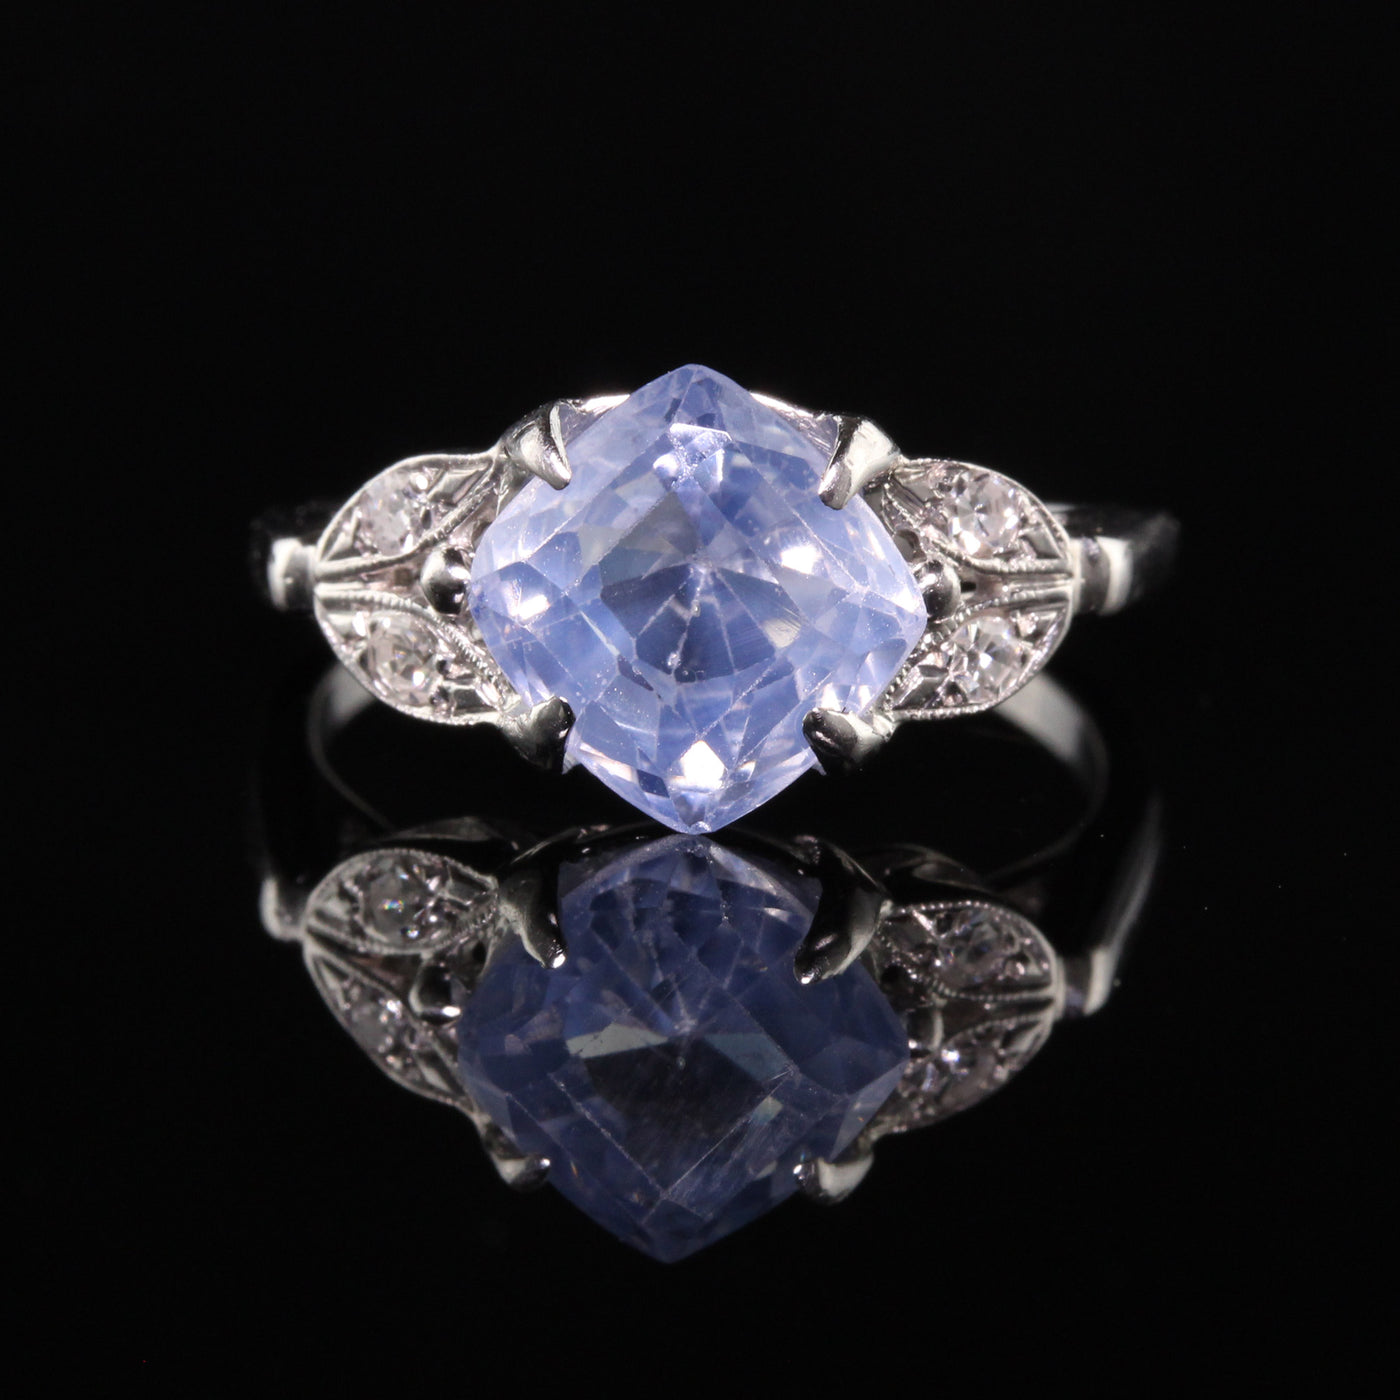 Antique Art Deco 14K White Gold Old Cut Sapphire and Diamond Engagement Ring